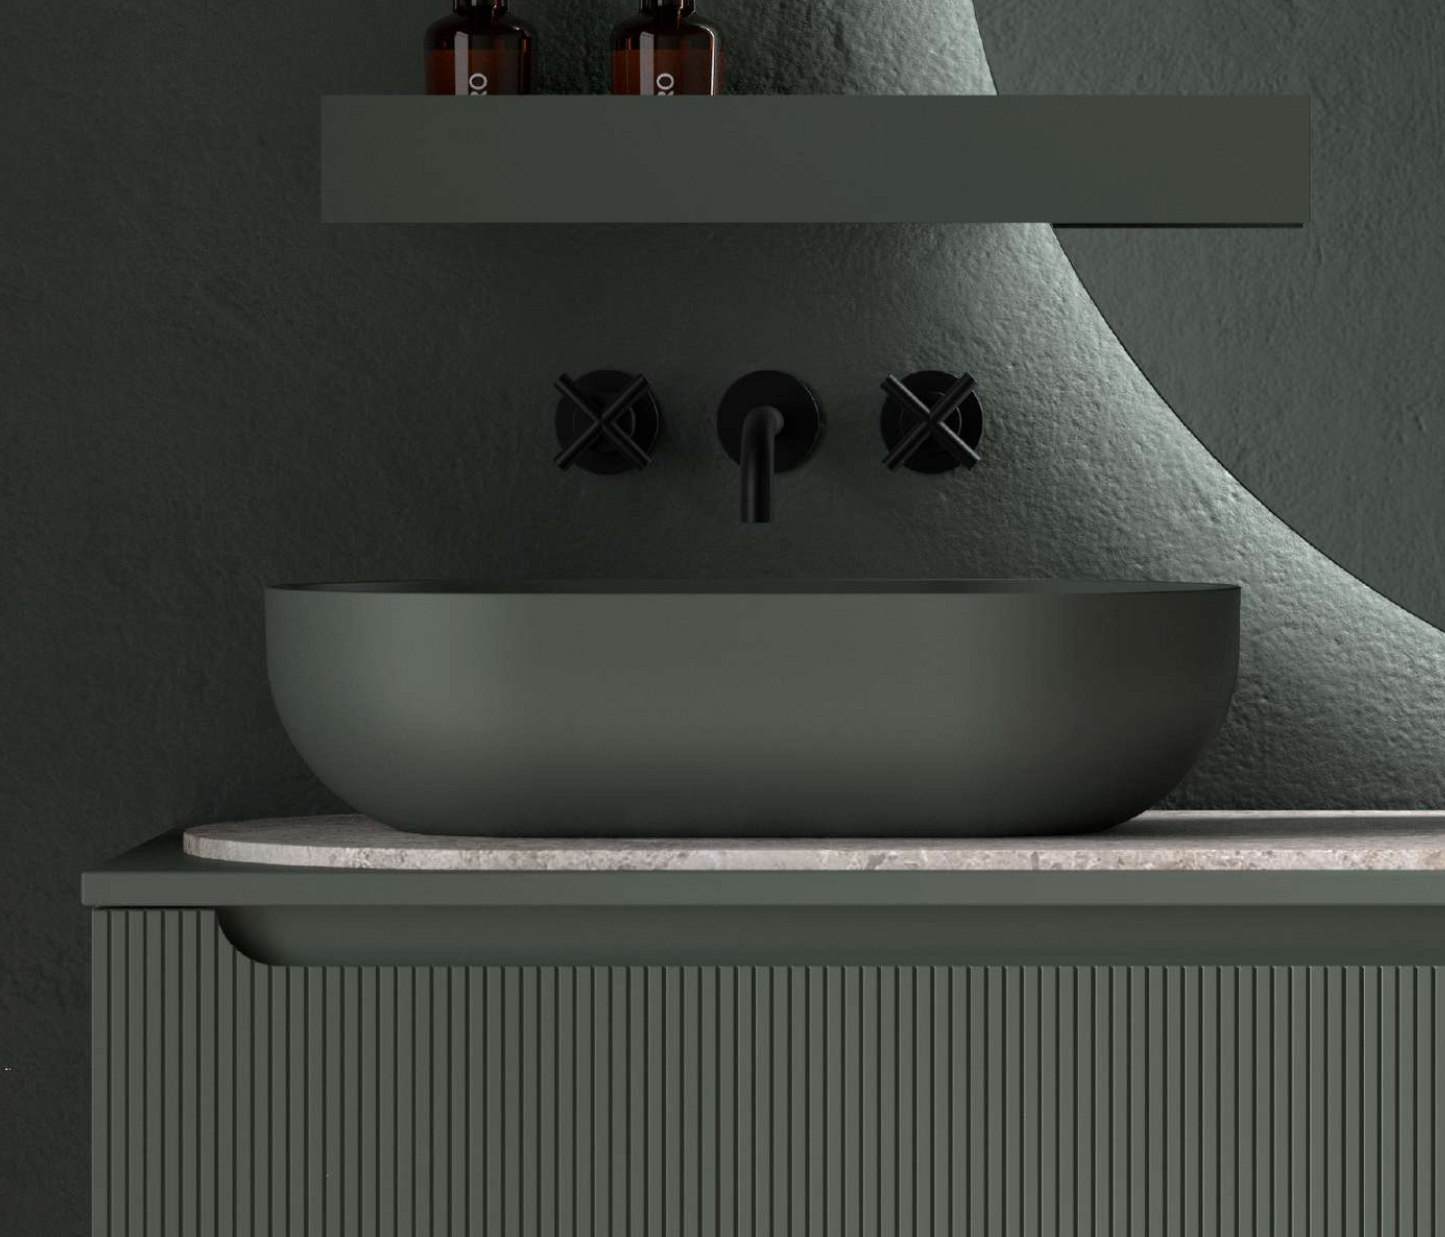 Capsula countertop washbasin by Maderó Atelier